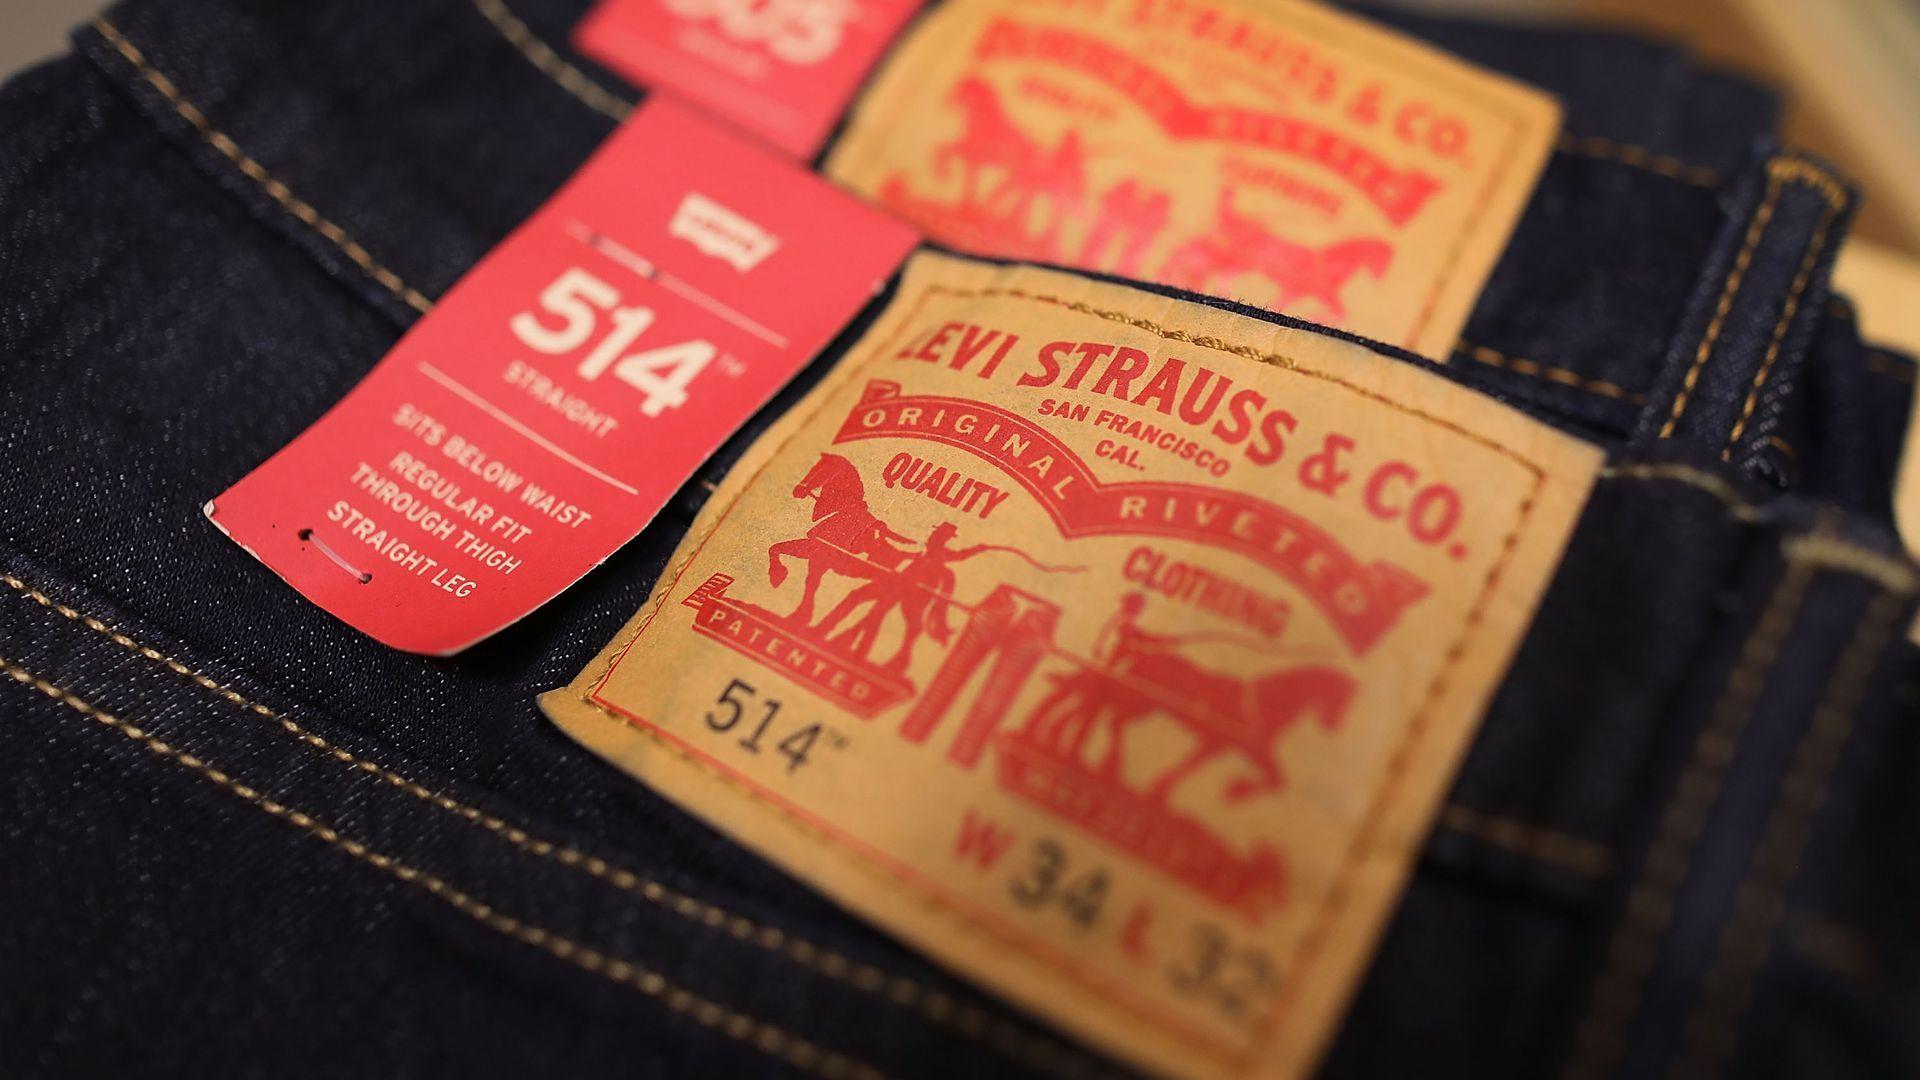 Levi Strauss files for IPO